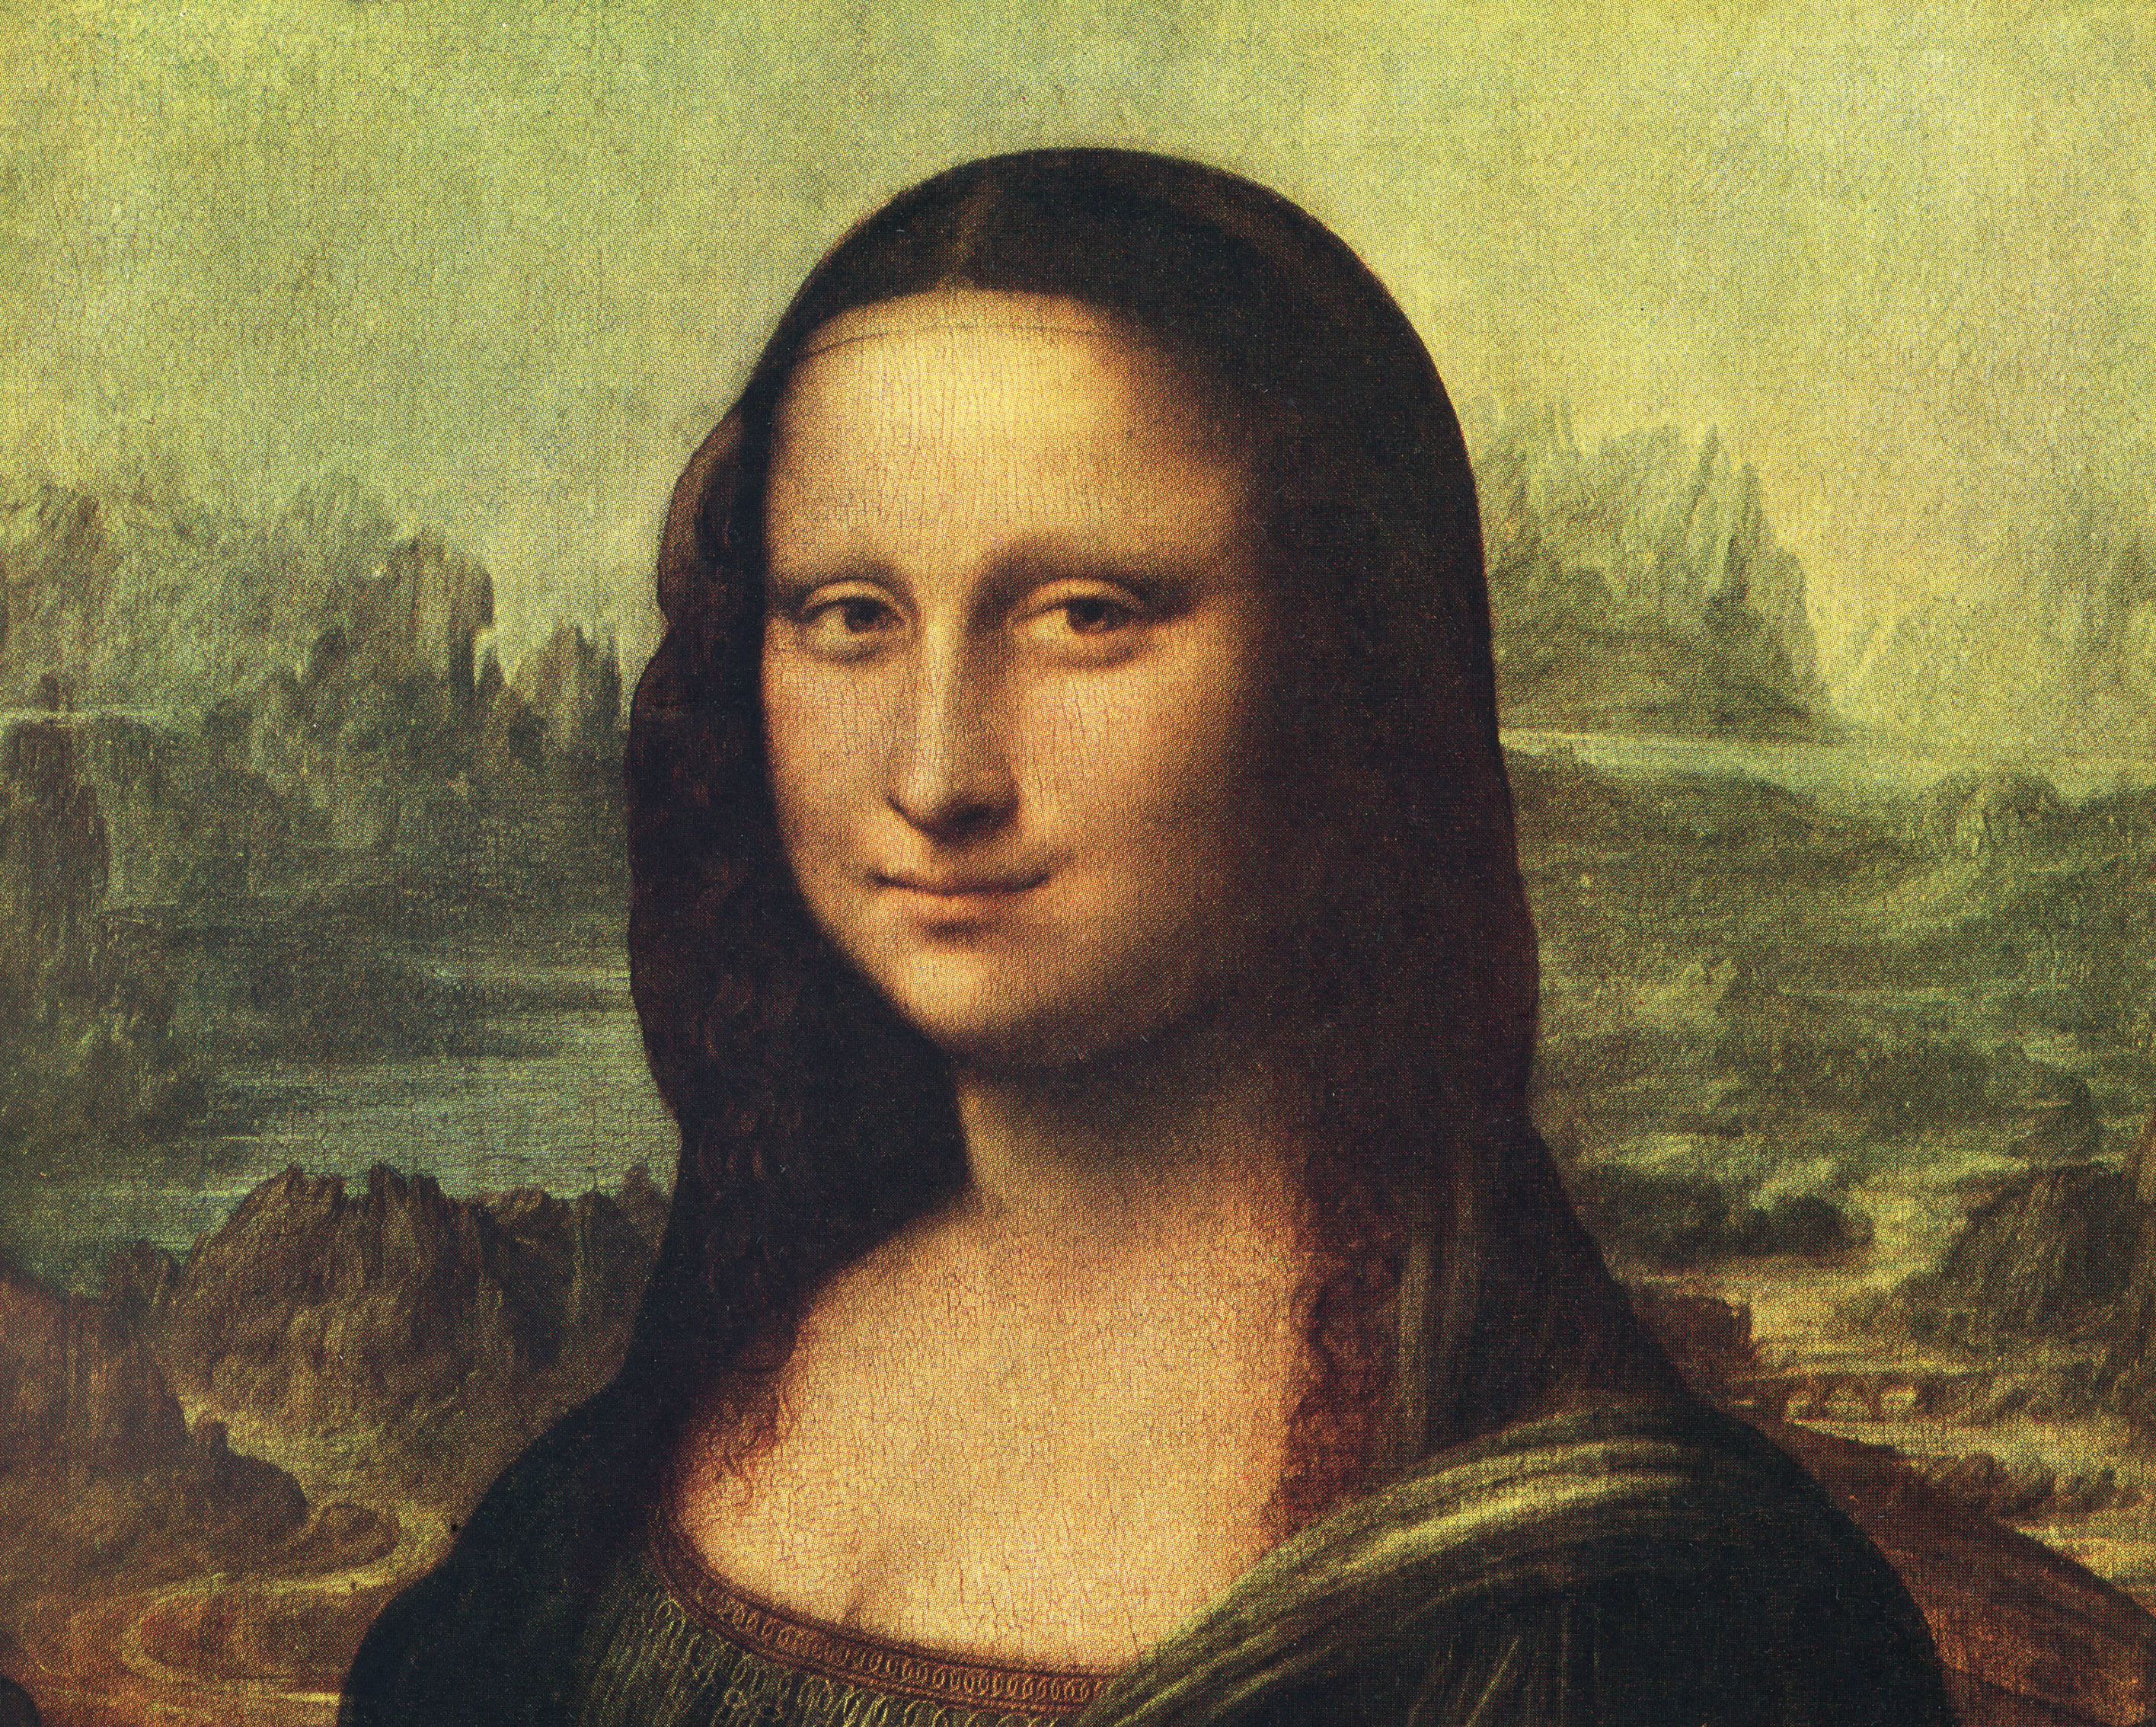 The ‘Mona Lisa’ May Leave the Louvre for the First Time in 44 Years